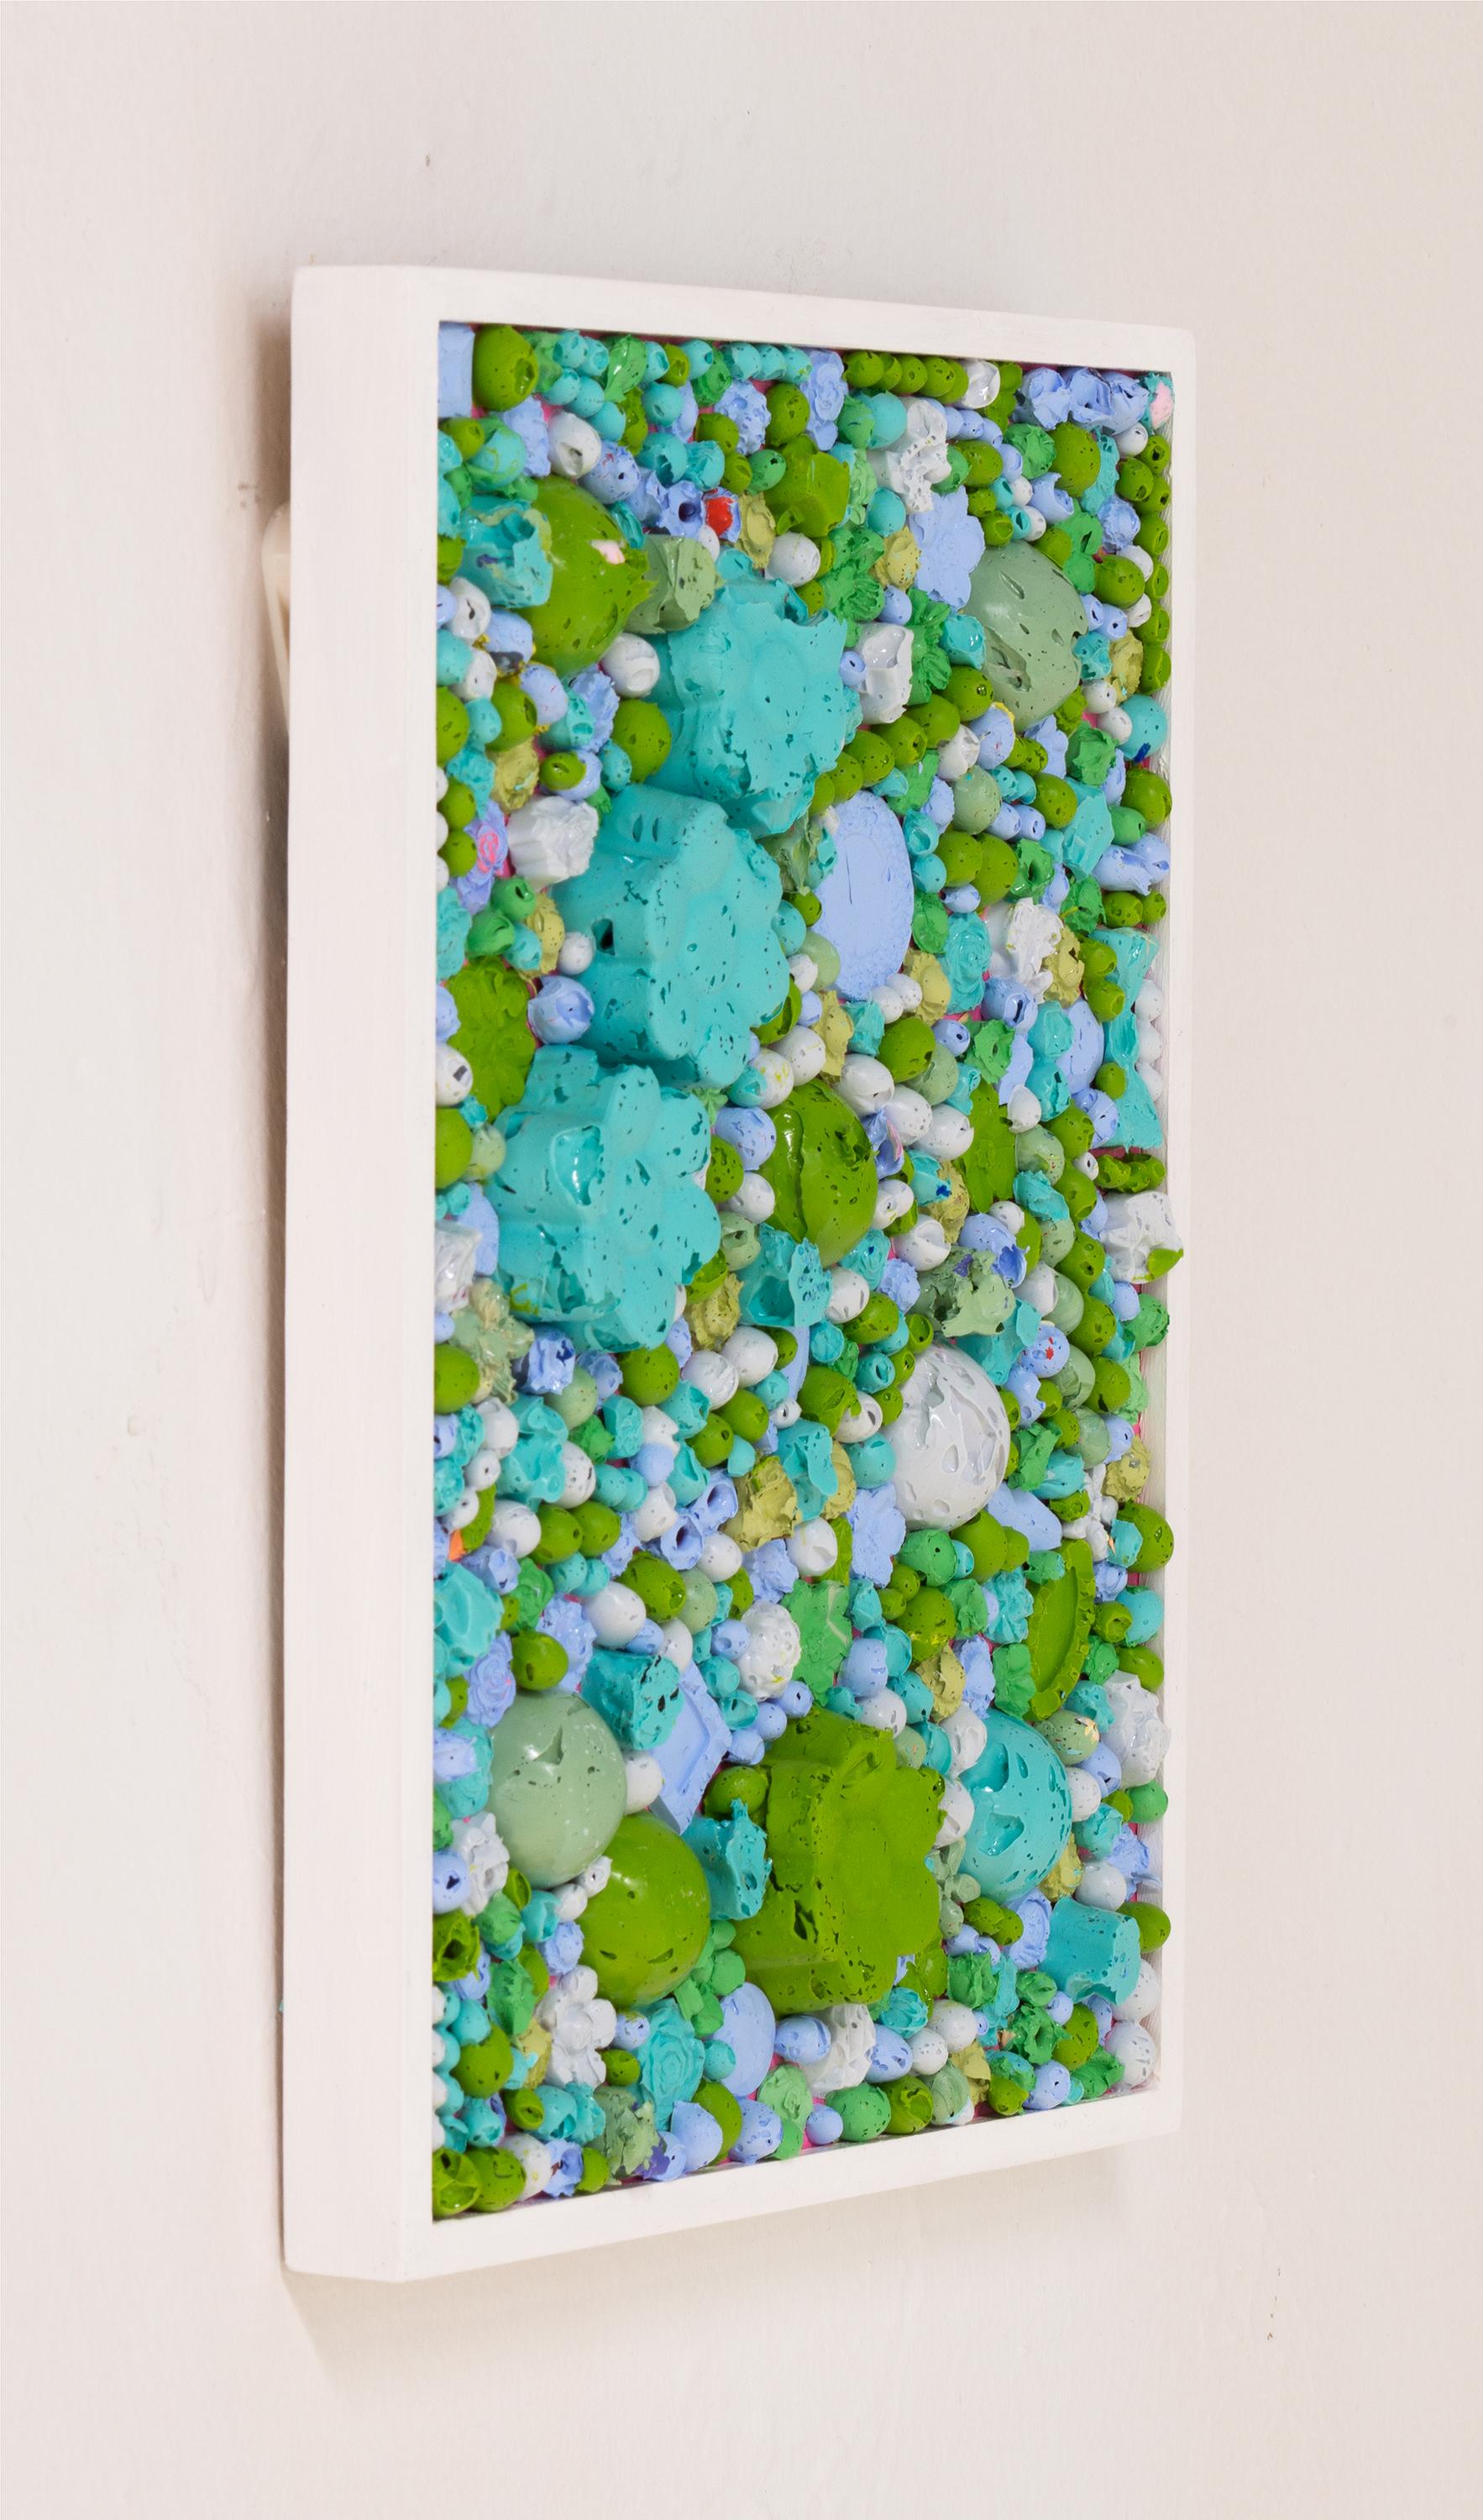 BLUE & GREEN TAPESTRY II - Framed, Sculptural Acrylic Painting on Wood Panel - Contemporary Sculpture by Natalie Harrison